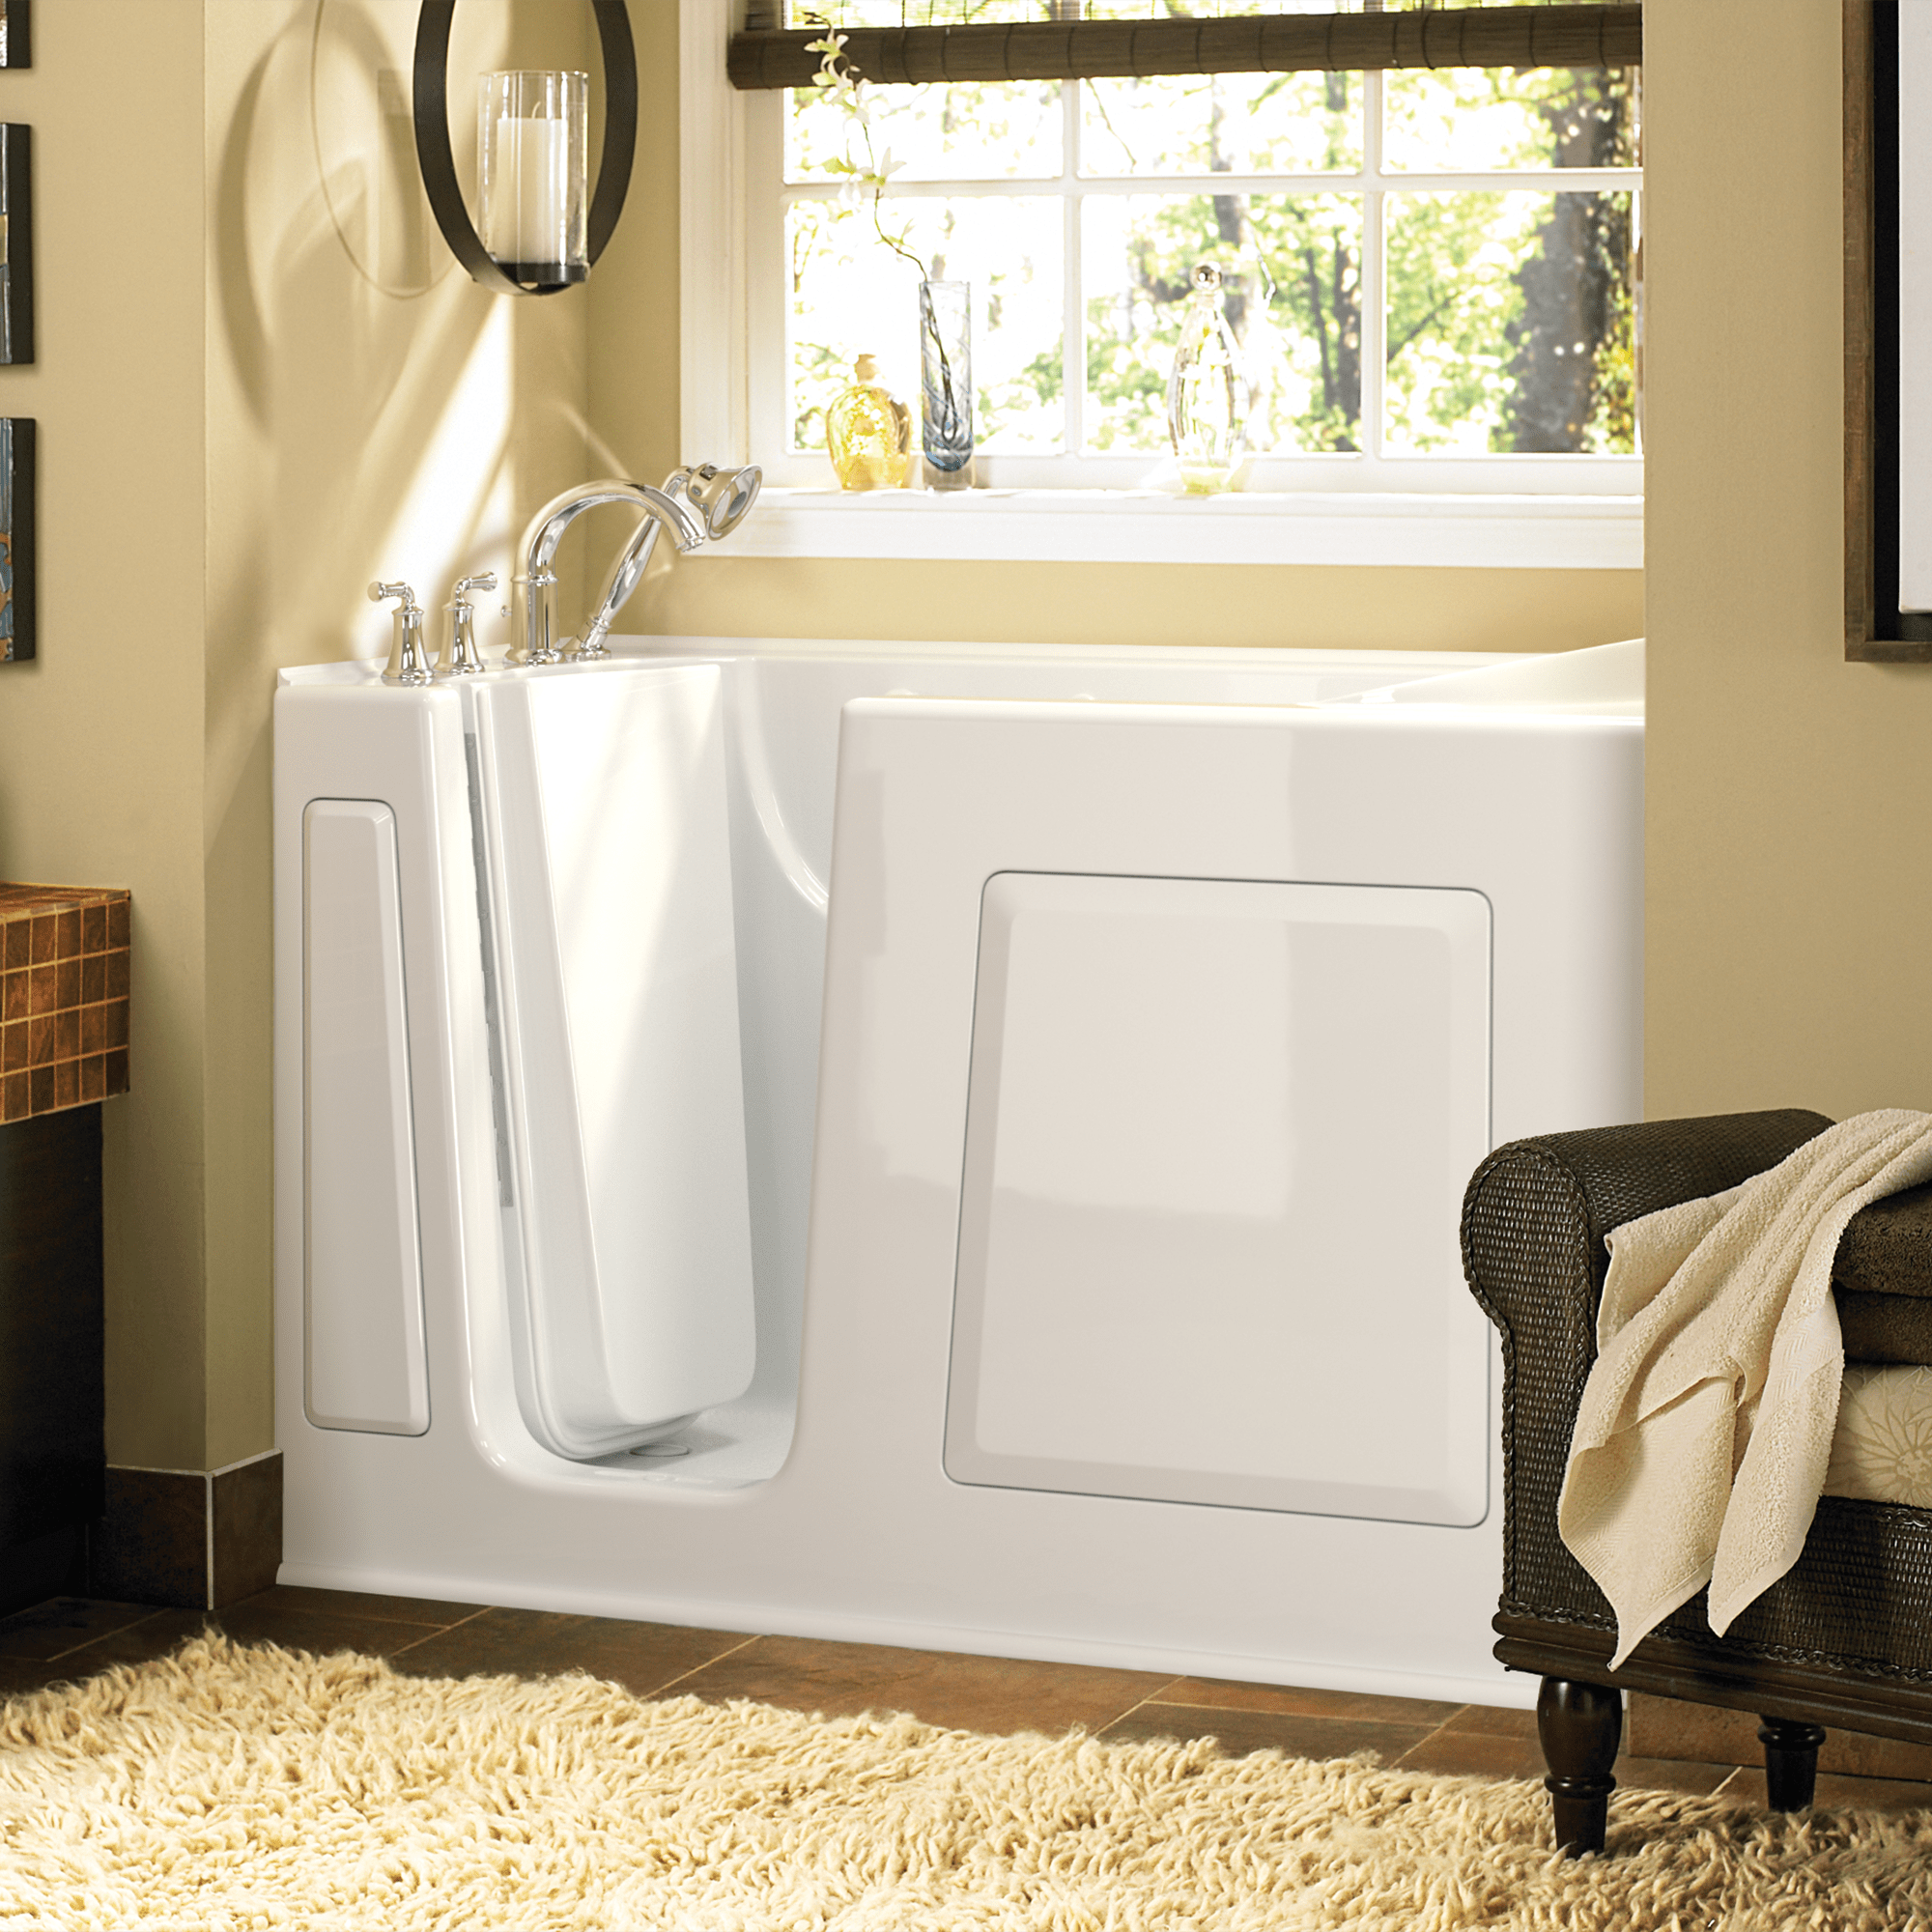 Gelcoat Value Series 30 x 60 -Inch Walk-in Tub With Soaker System - Left-Hand Drain With Faucet